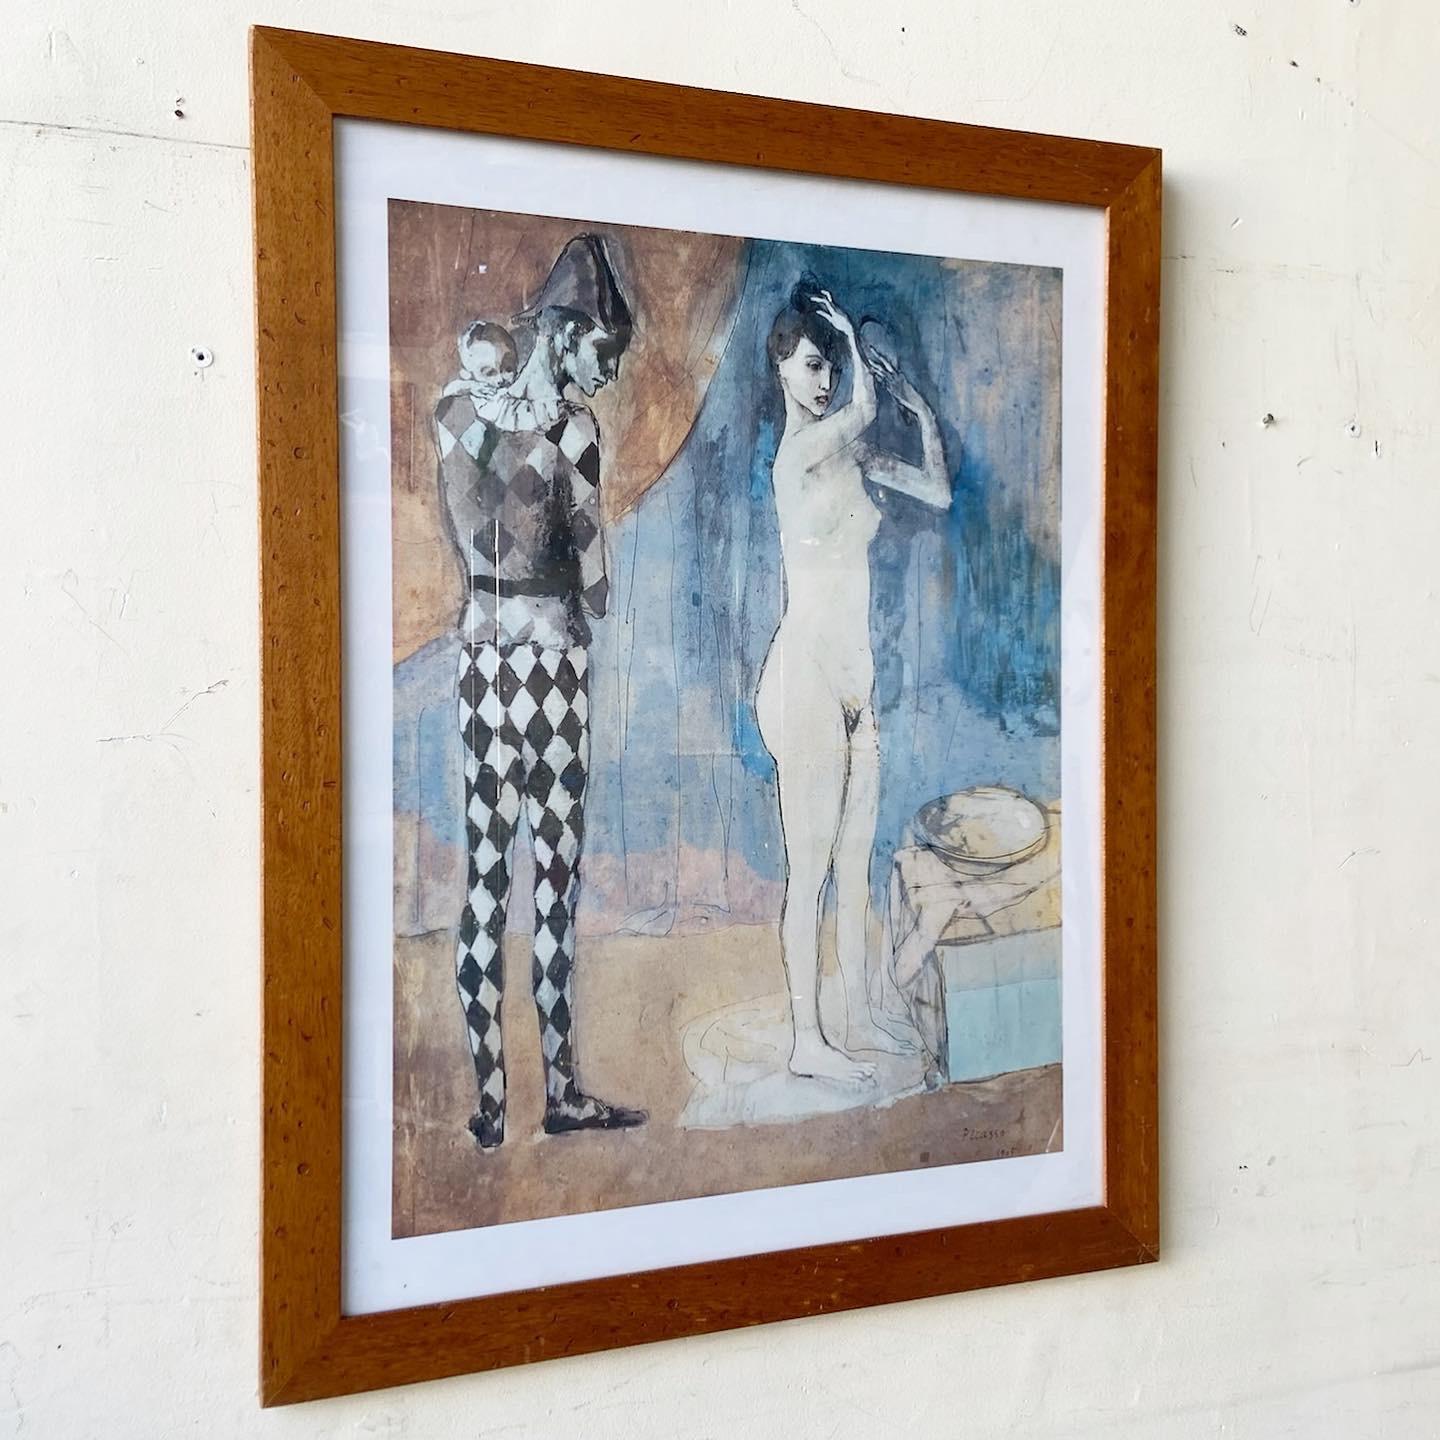 Exceptional vintage framed Picasso print titled “Harlequin’s Family”. Features a wooden frame.
 